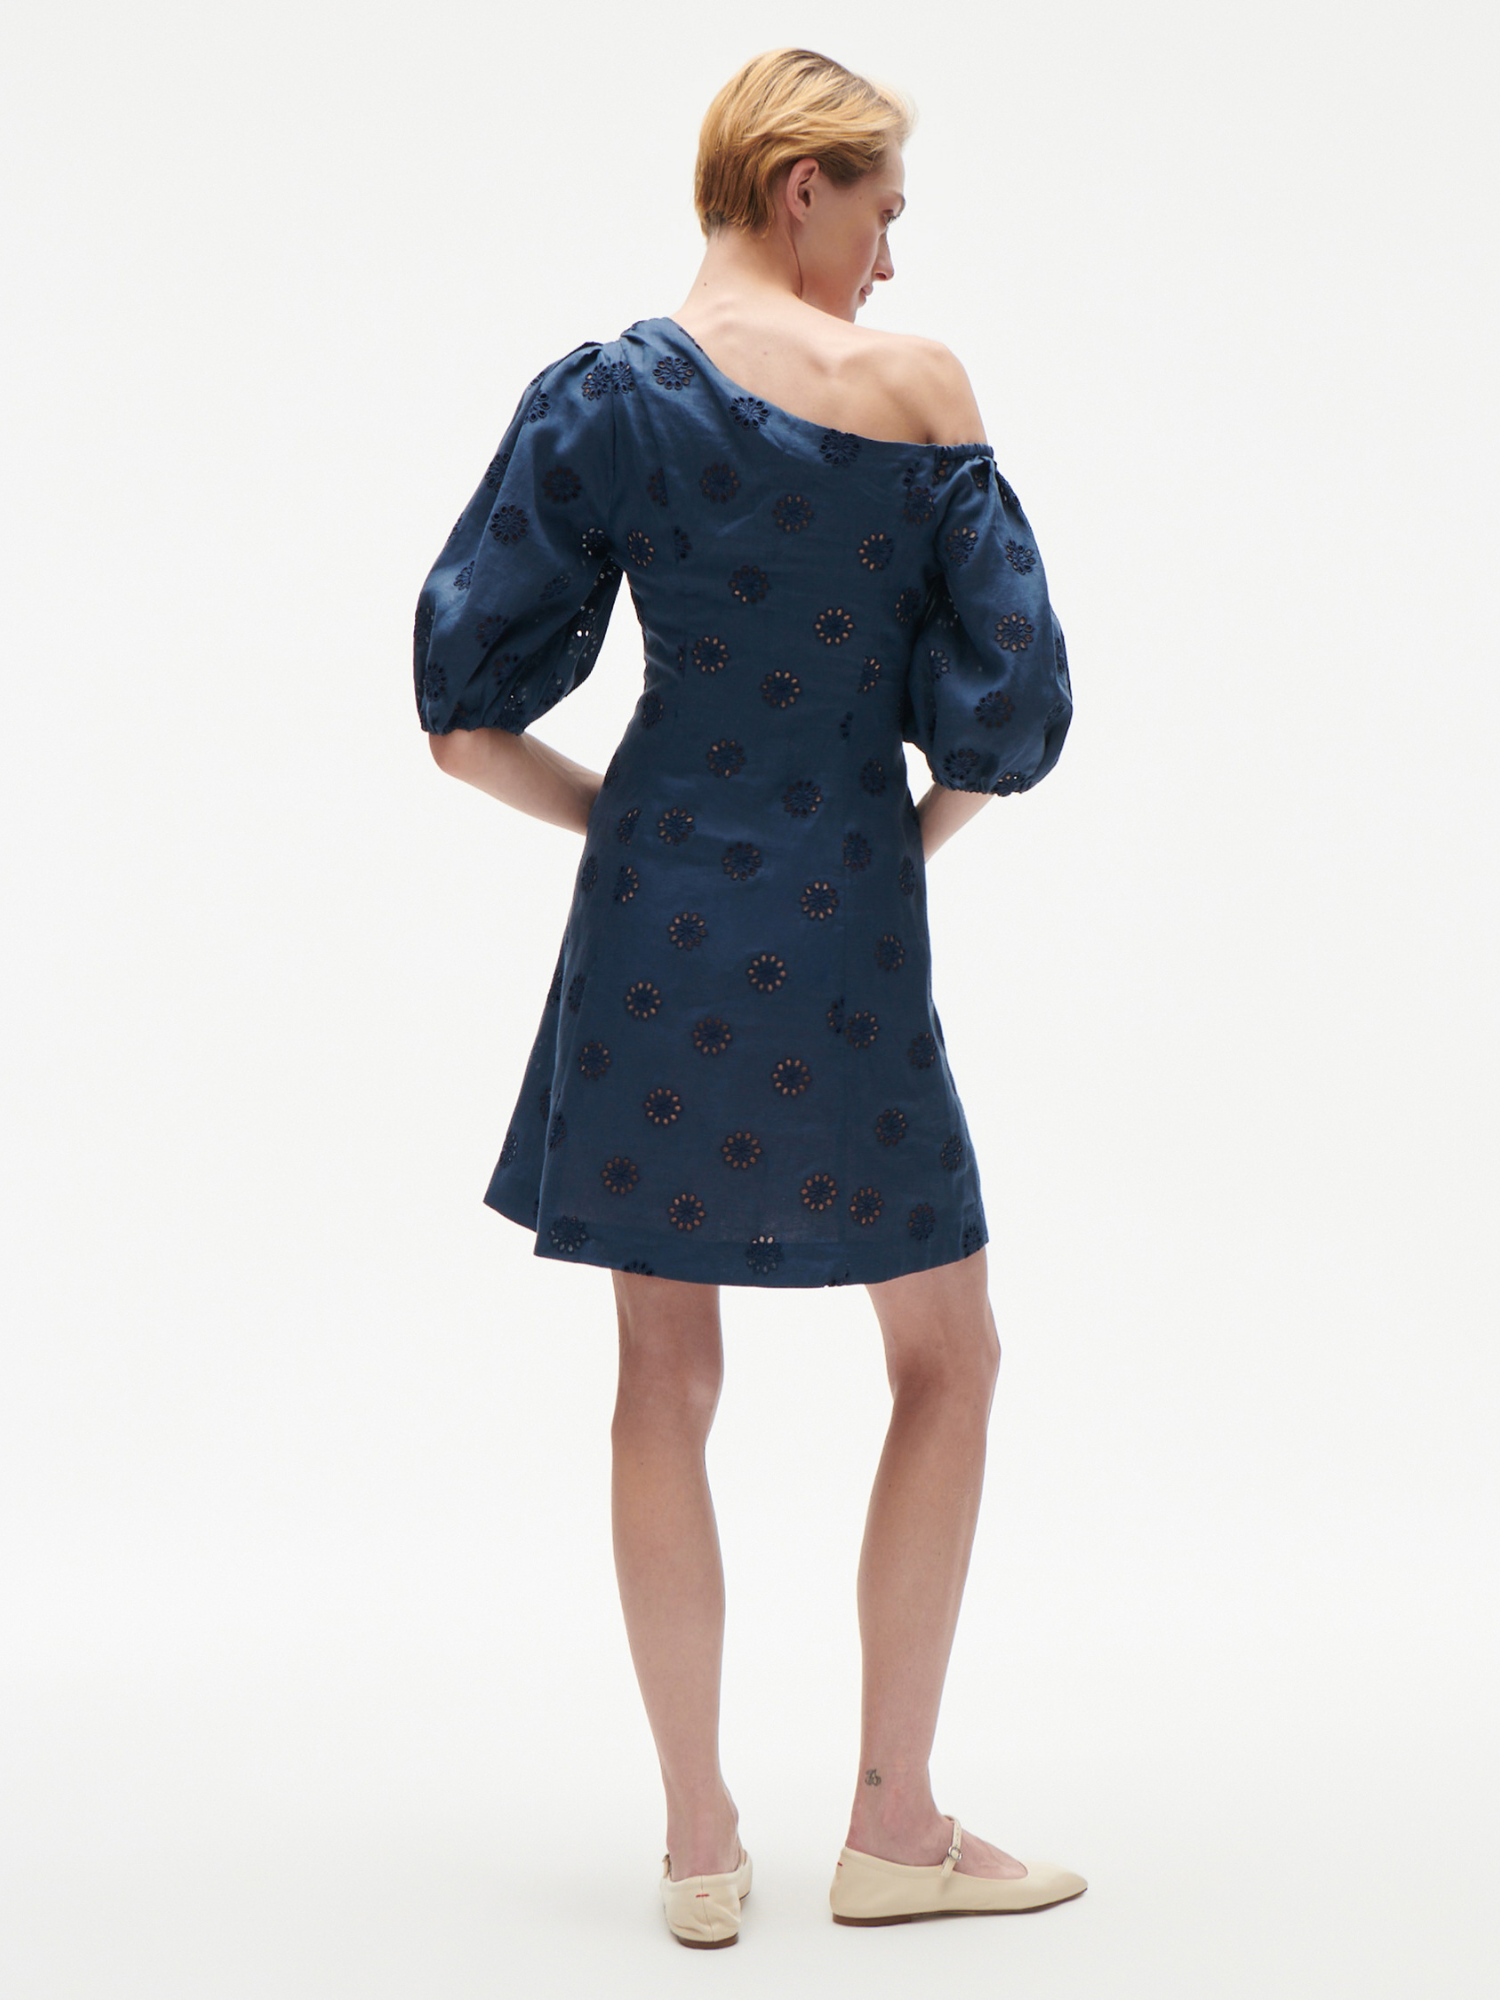 Figue Darcy Dress in Slate Navy